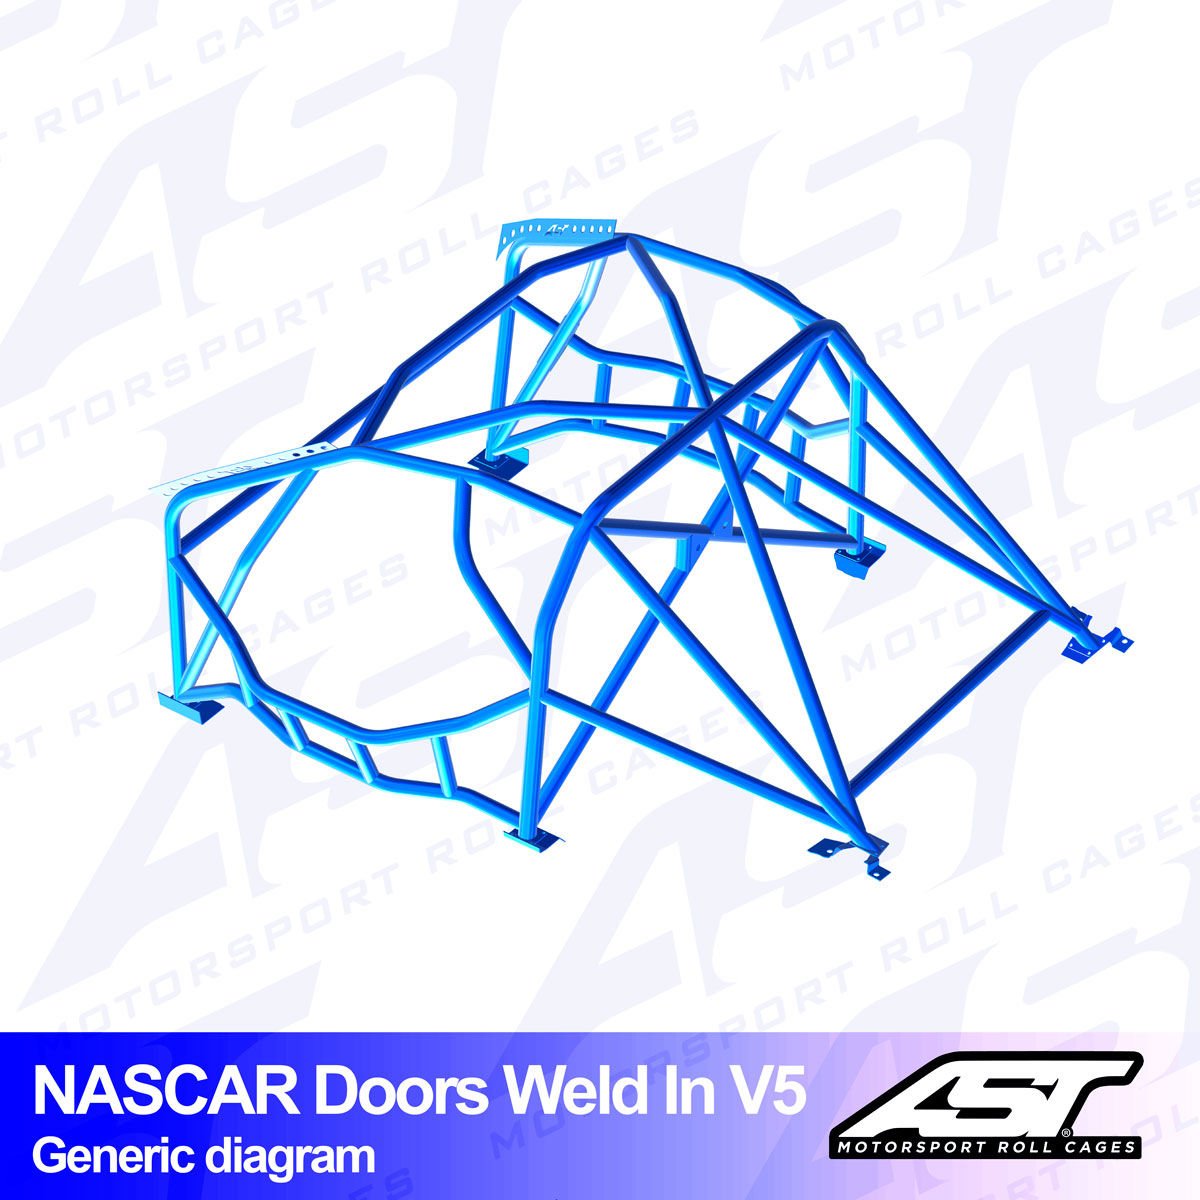 Roll Cage BMW (E46) 3-Series 3-doors Compact RWD WELD IN V5 NASCAR-door for drift